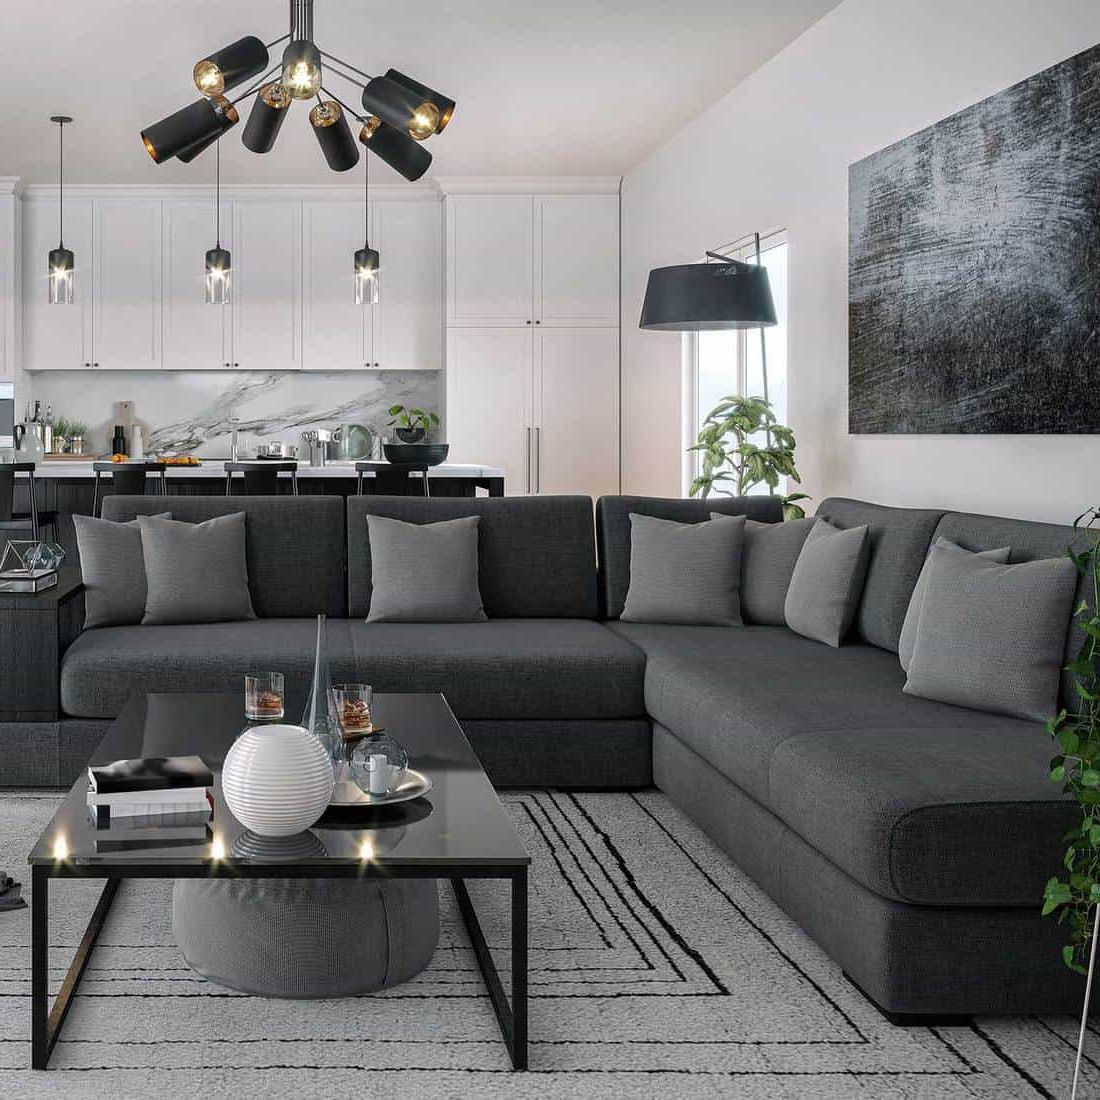 [%34 Gray Couch Living Room Ideas [inc. Photos] Within Most Recently Released Sofas In Dark Gray|sofas In Dark Gray Throughout Most Recent 34 Gray Couch Living Room Ideas [inc. Photos]|most Up To Date Sofas In Dark Gray Intended For 34 Gray Couch Living Room Ideas [inc. Photos]|latest 34 Gray Couch Living Room Ideas [inc (View 9 of 15)